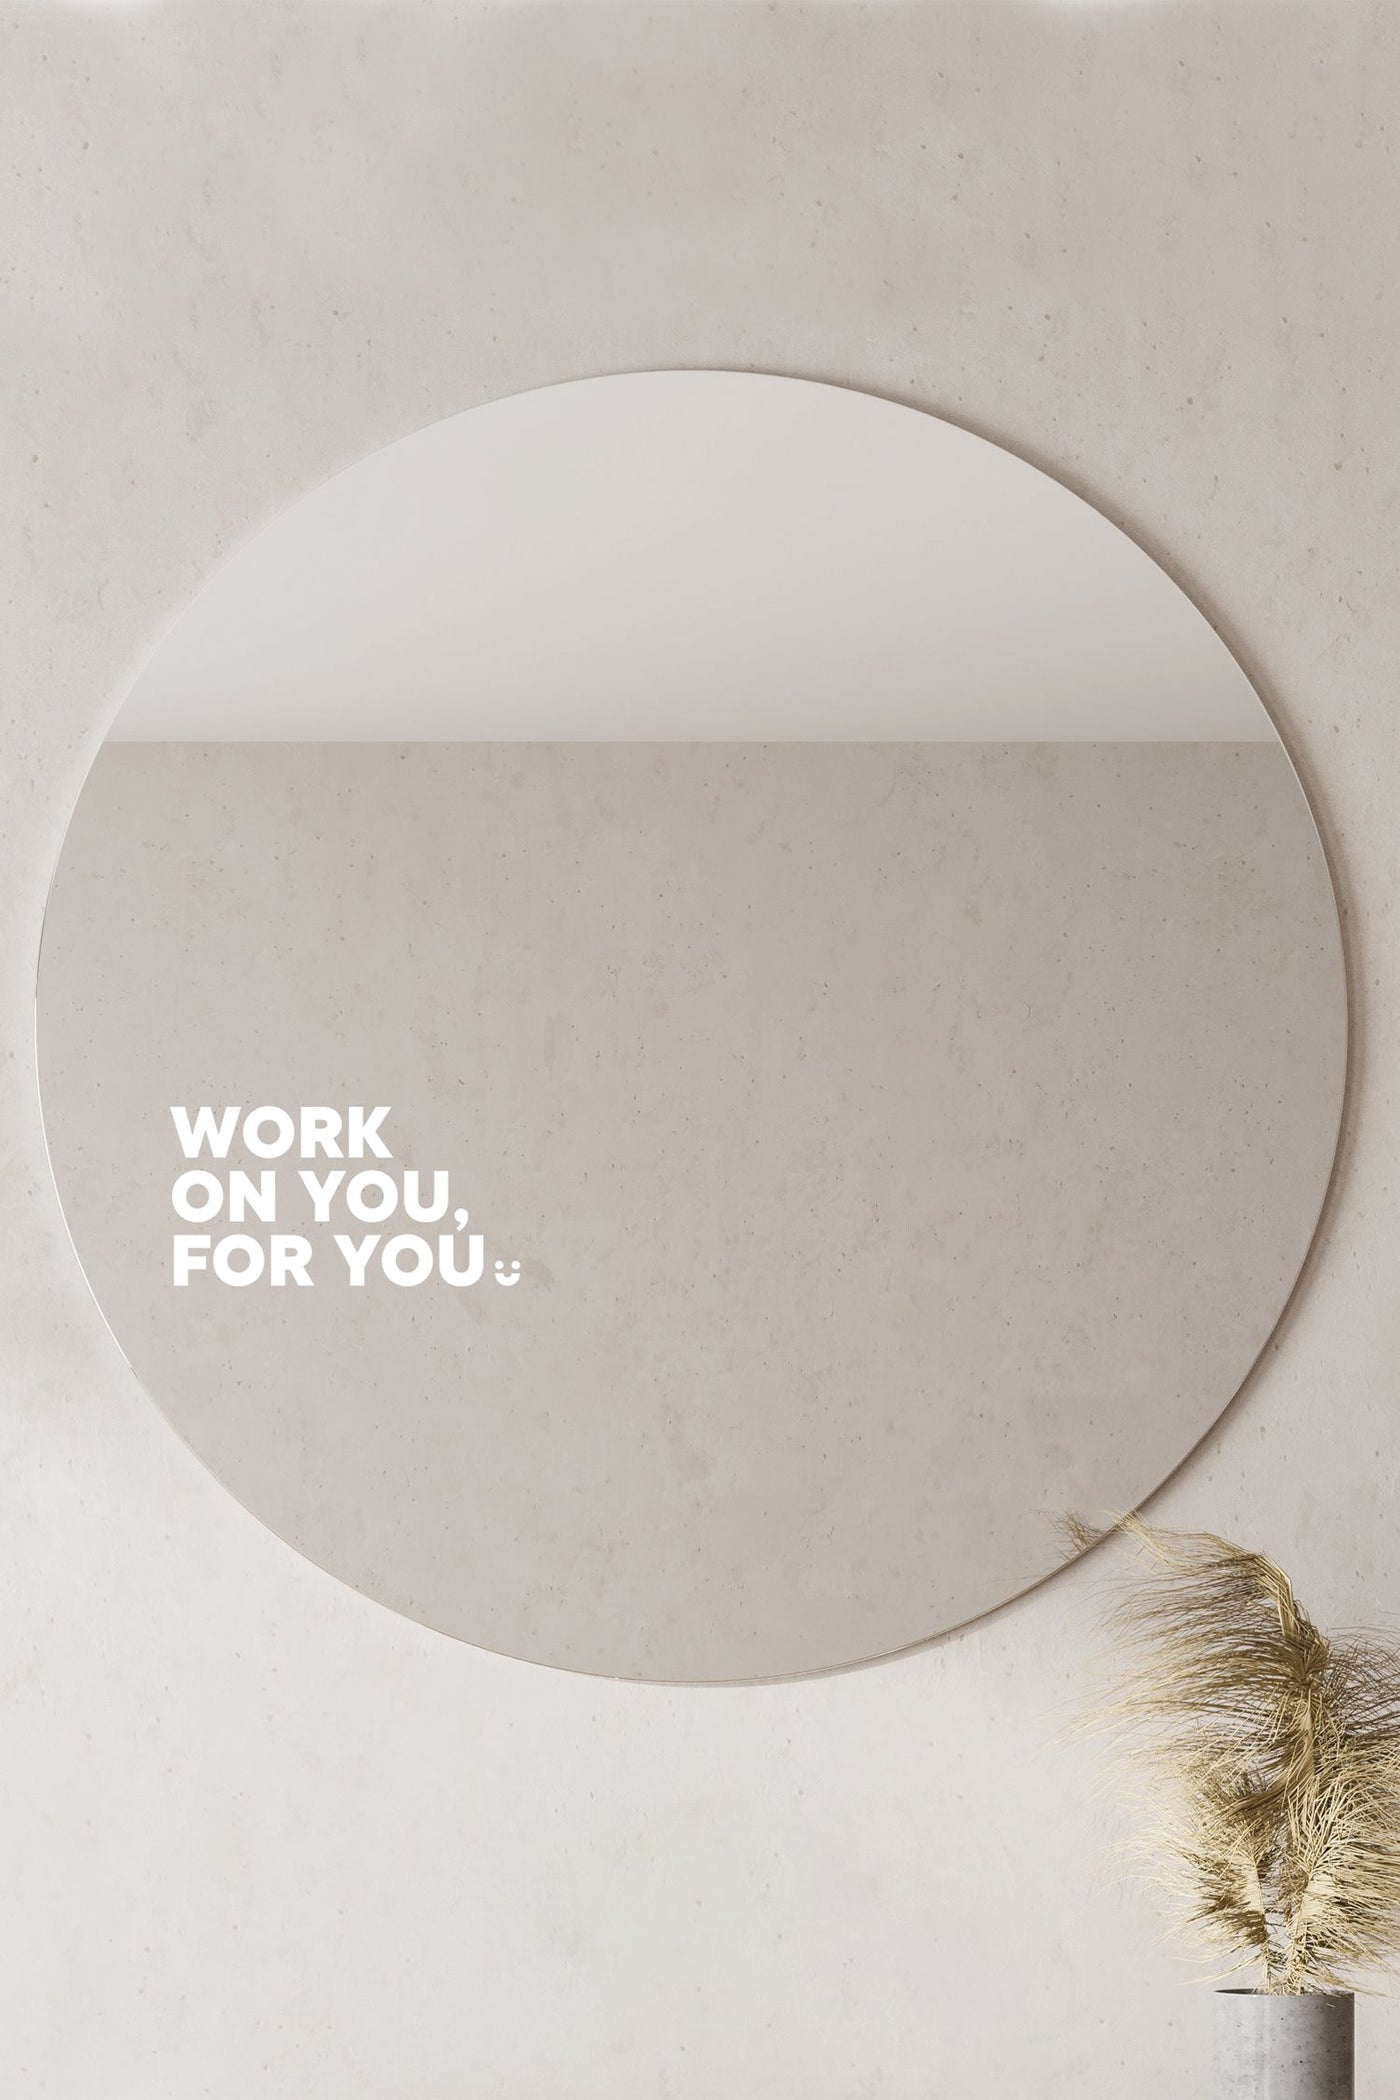 WORK ON YOU. FOR YOU. - Affirmation Mirror Sticker Affirmation Stickers Selfawear 